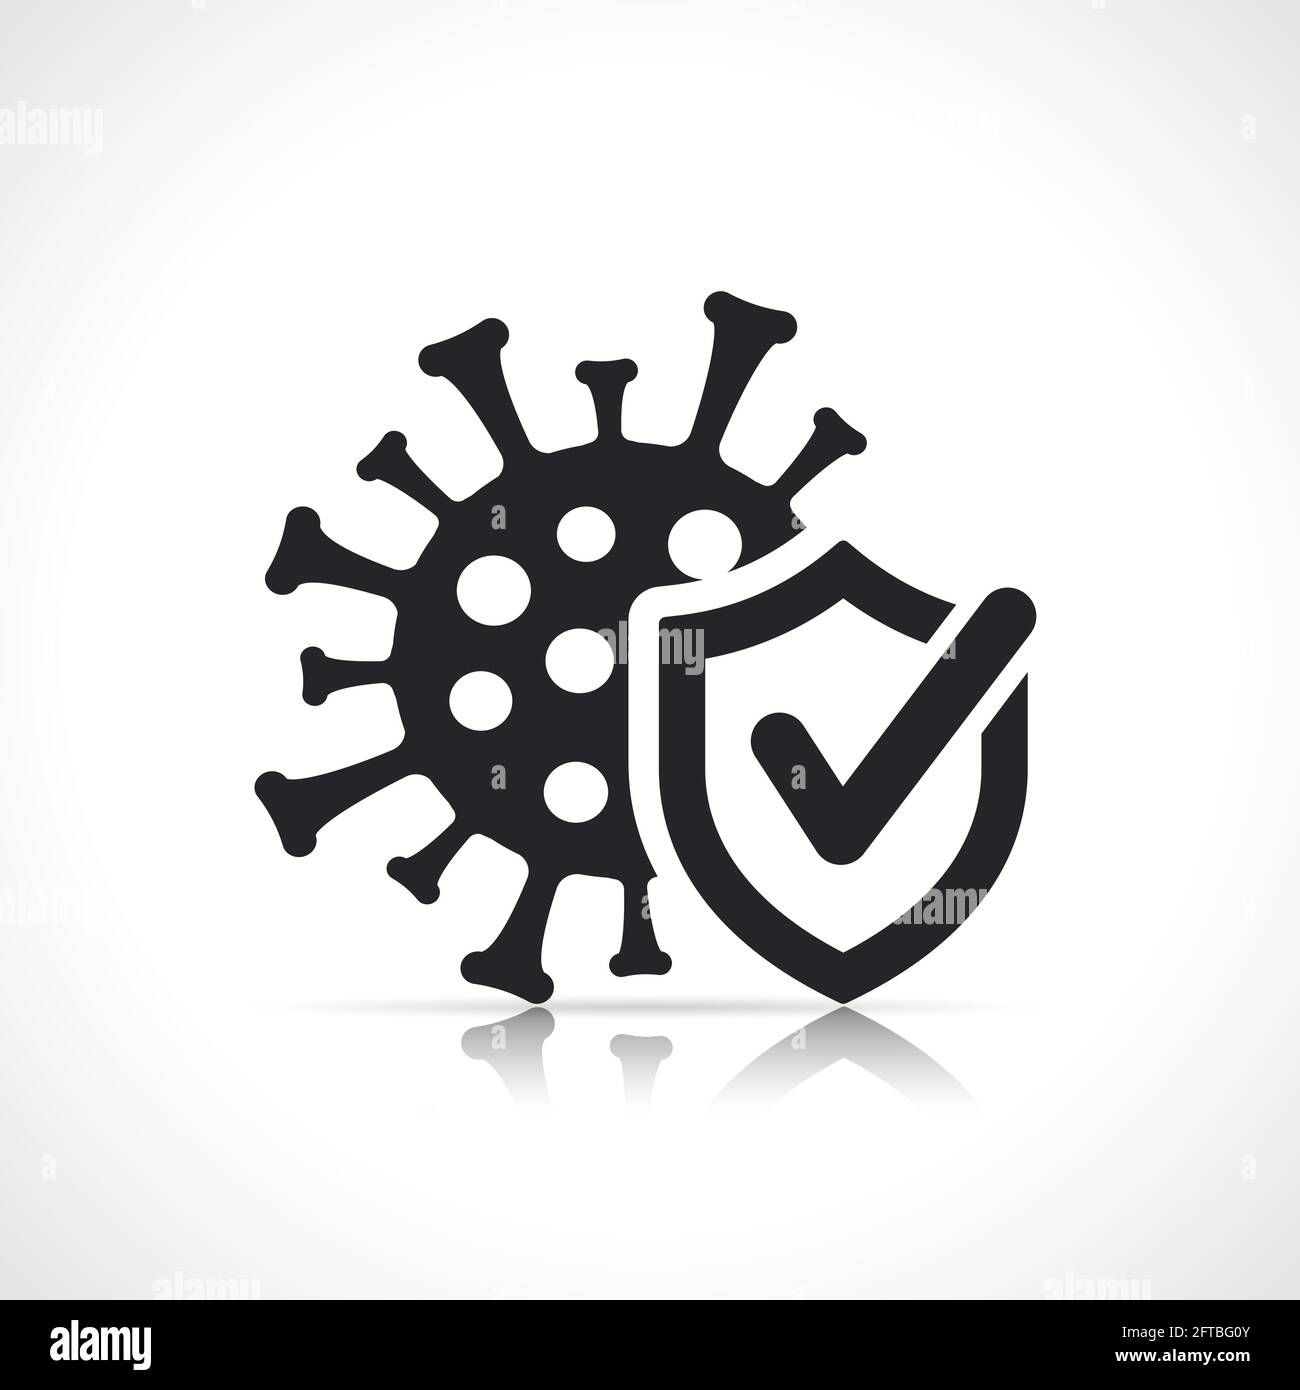 disinfected or anti virus icon isolated design Stock Vector